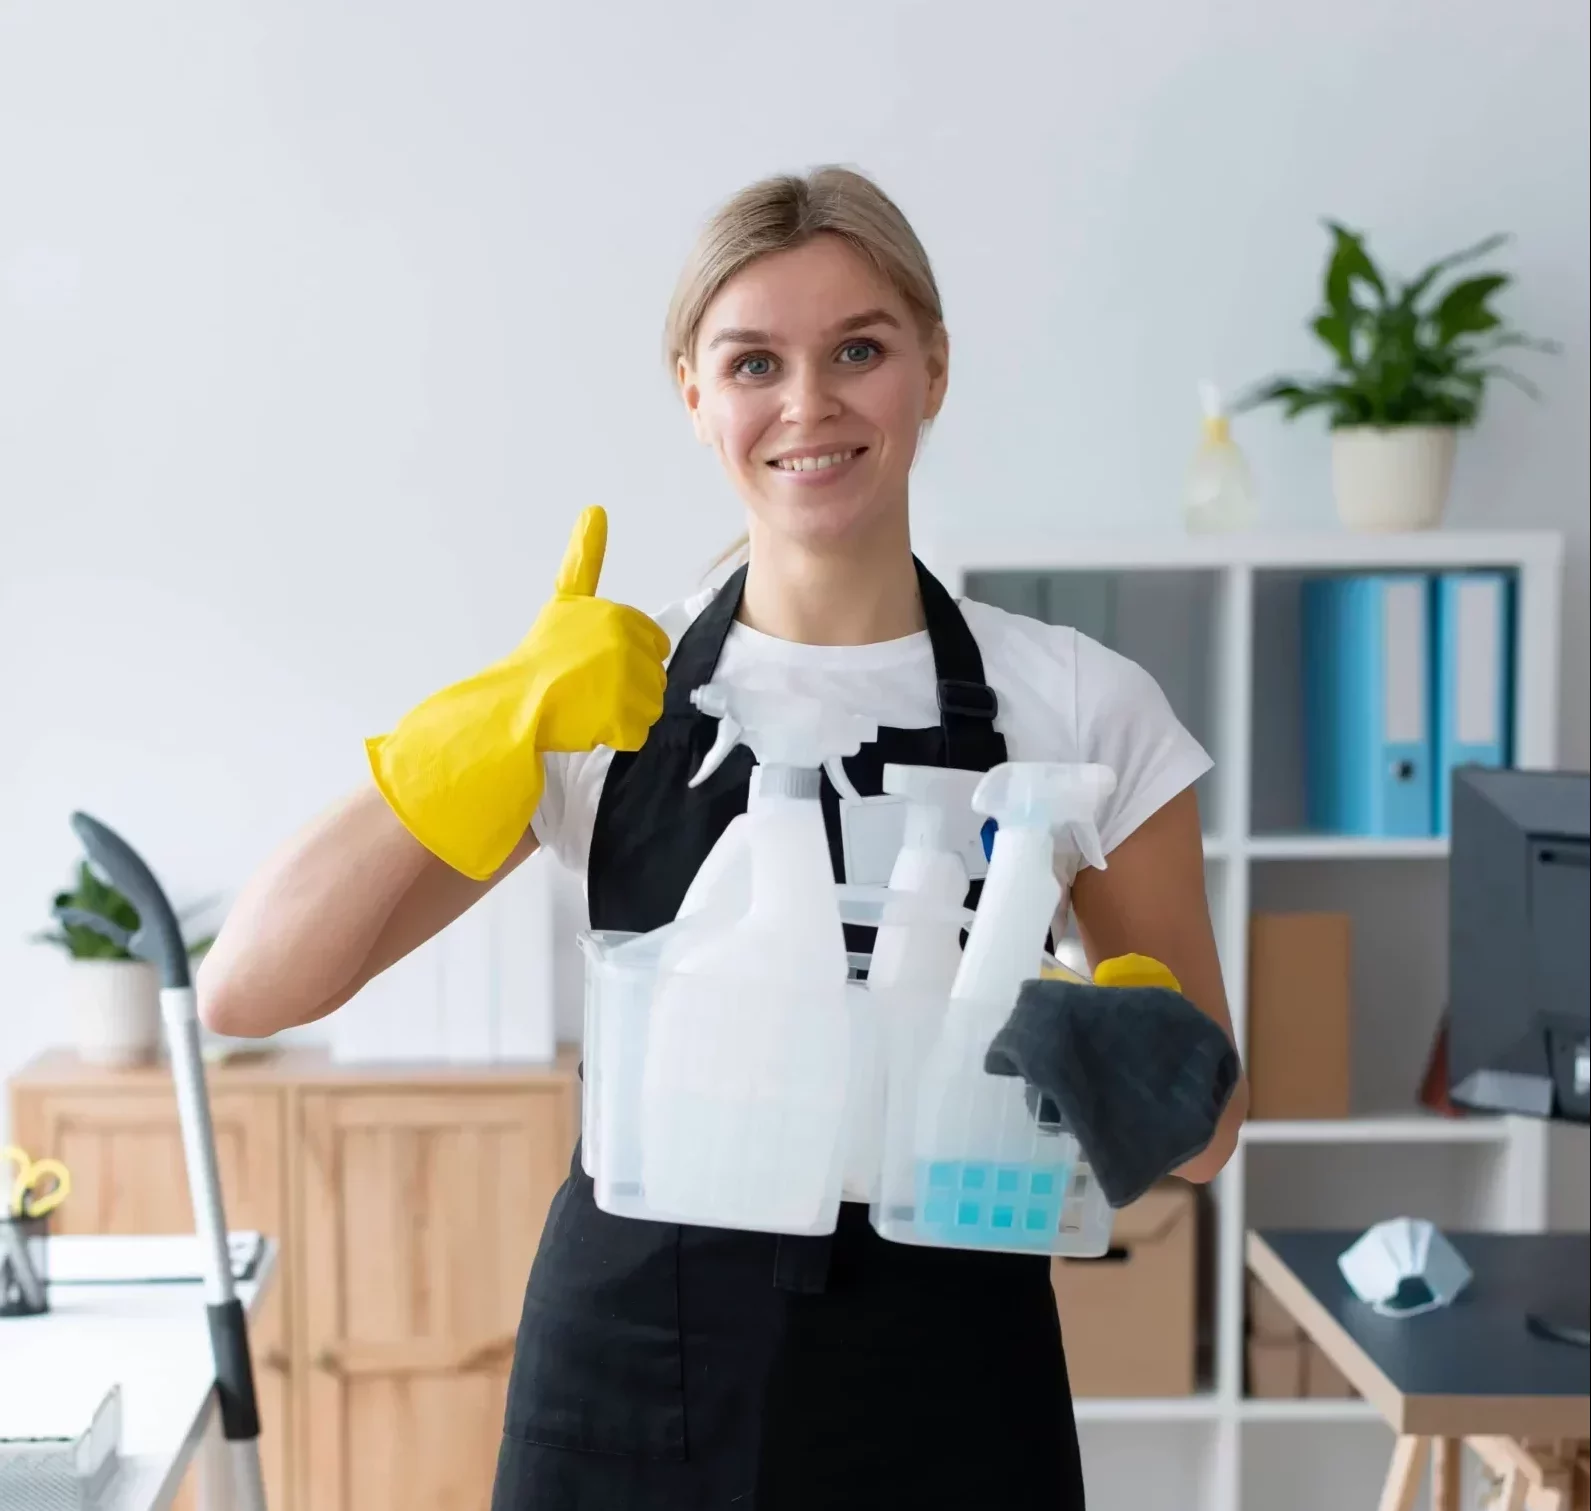 cleaning lady smiling showing thumbs up holding cleaning products